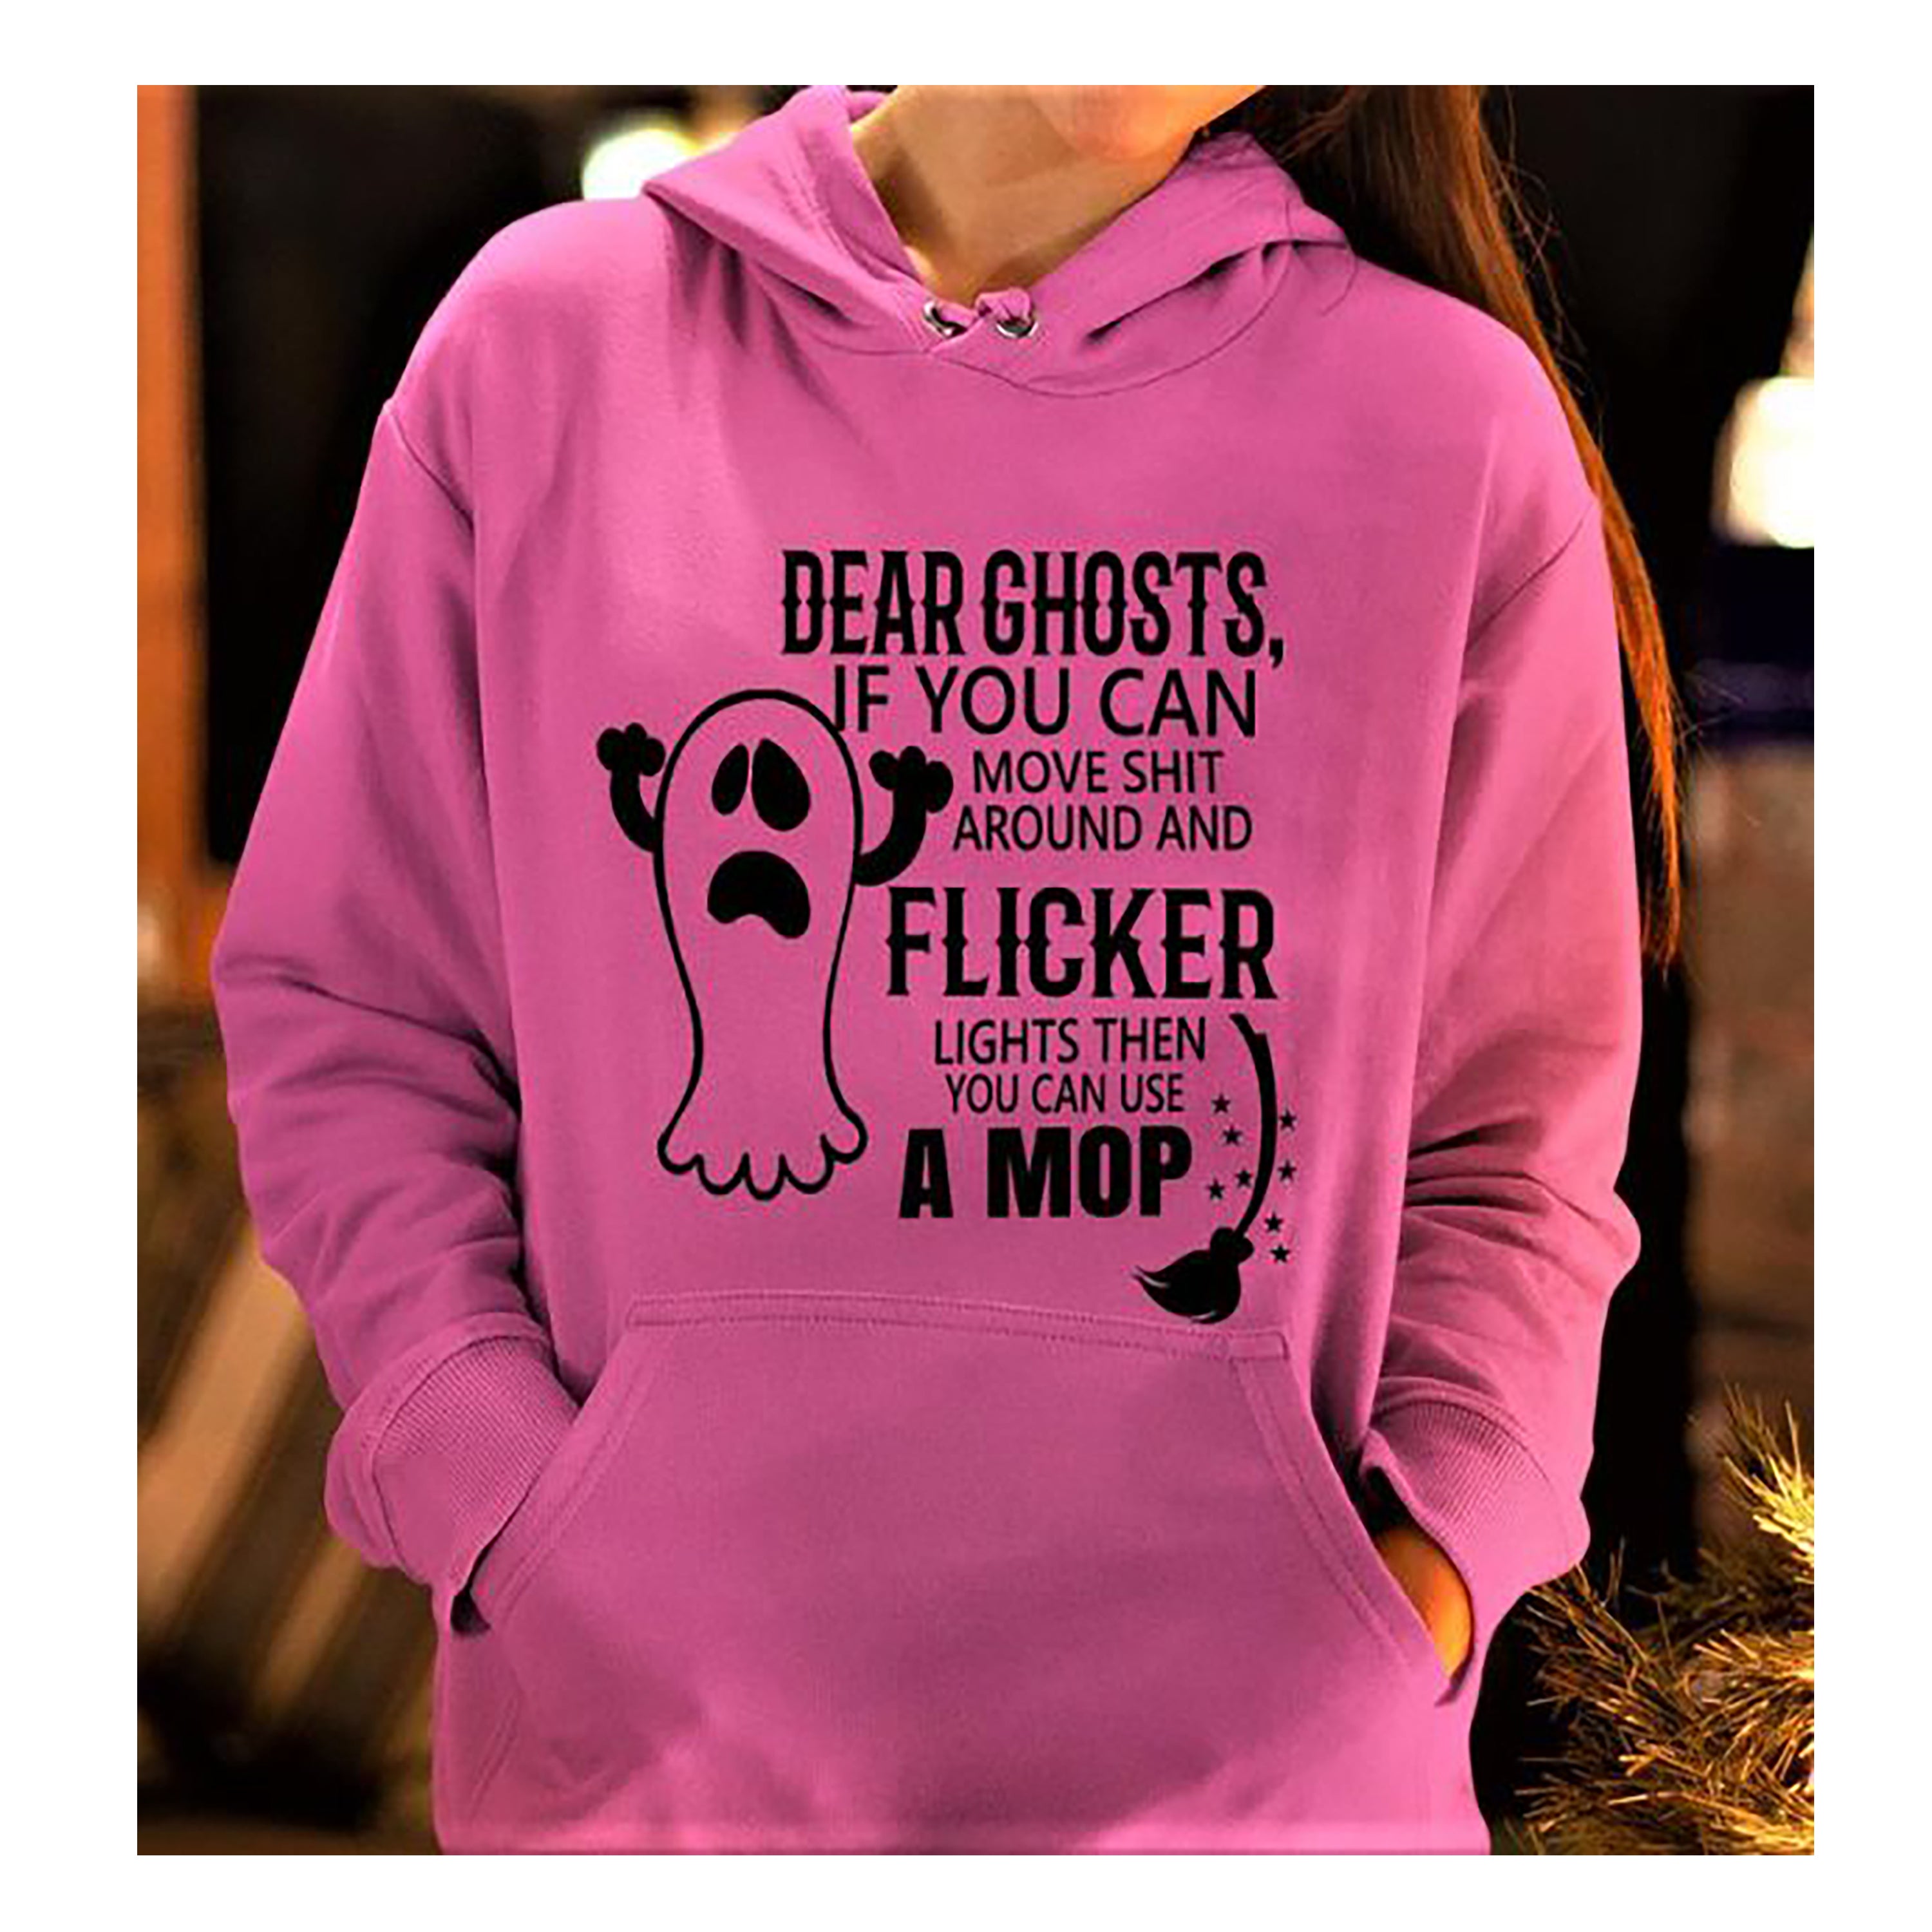 'FLICKER LIGHTS THEN YOU CAN USE A MOP''-Hoodie and SweatShirt